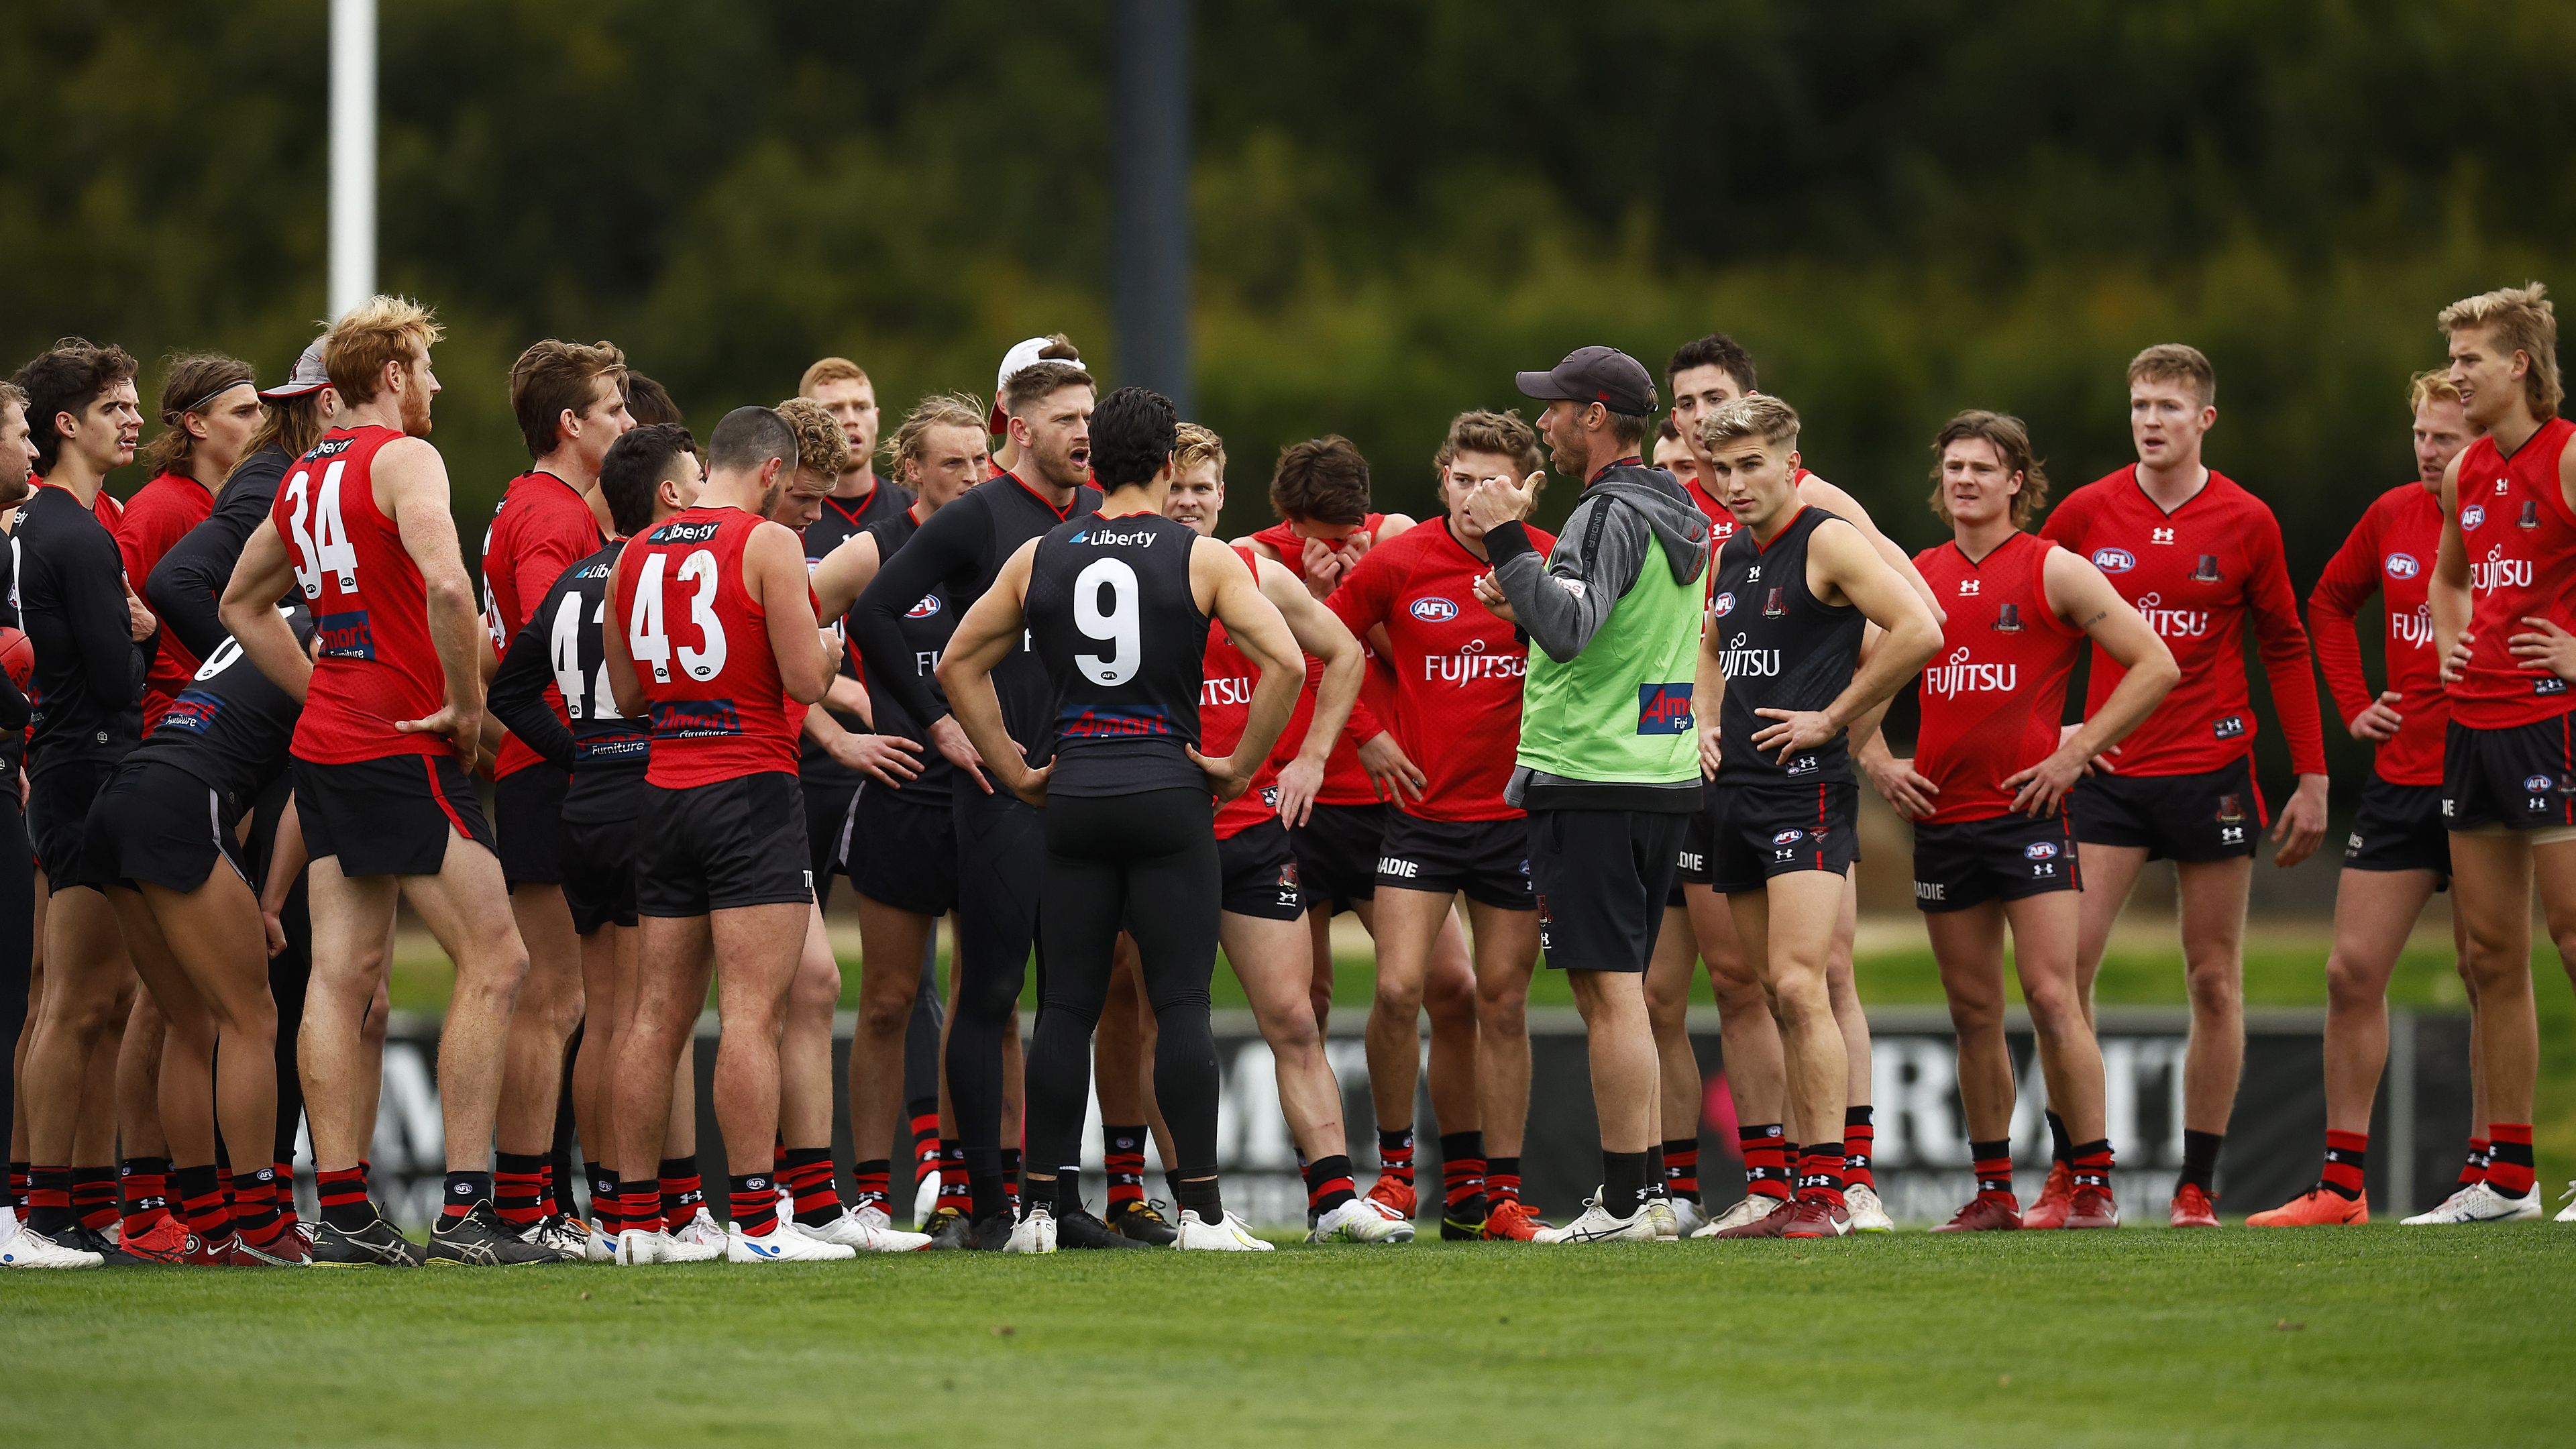 Disgruntled Bombers players unimpressed by new president's Alastair Clarkson chase, Ben Rutten treatment